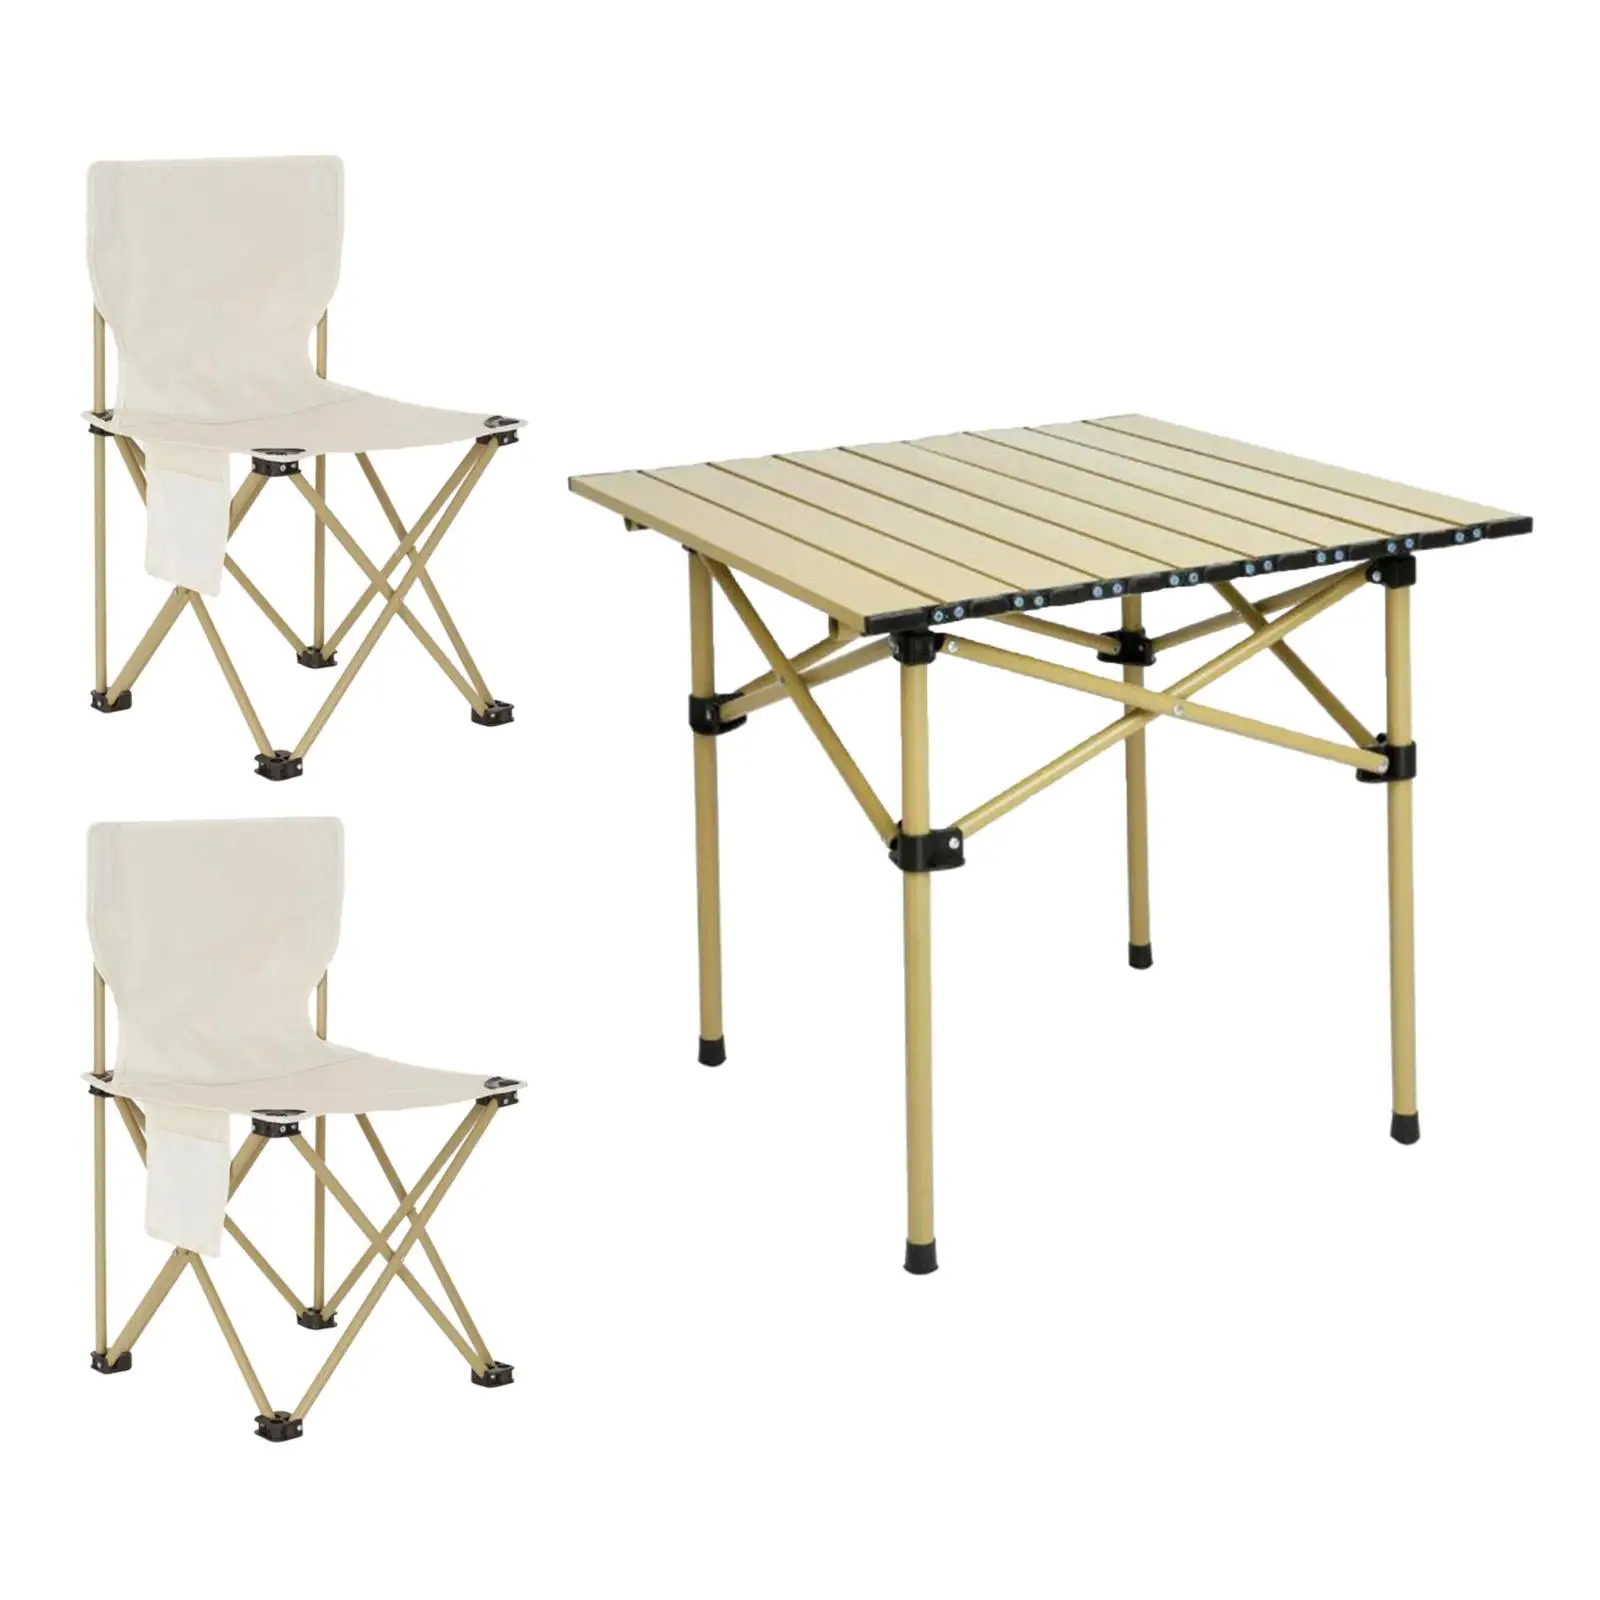 Camping Folding Table Chairs Set with 2 Stools Portable Side Table Foldable Picnic Table for Picnic Garden Yard Patio Outdoor